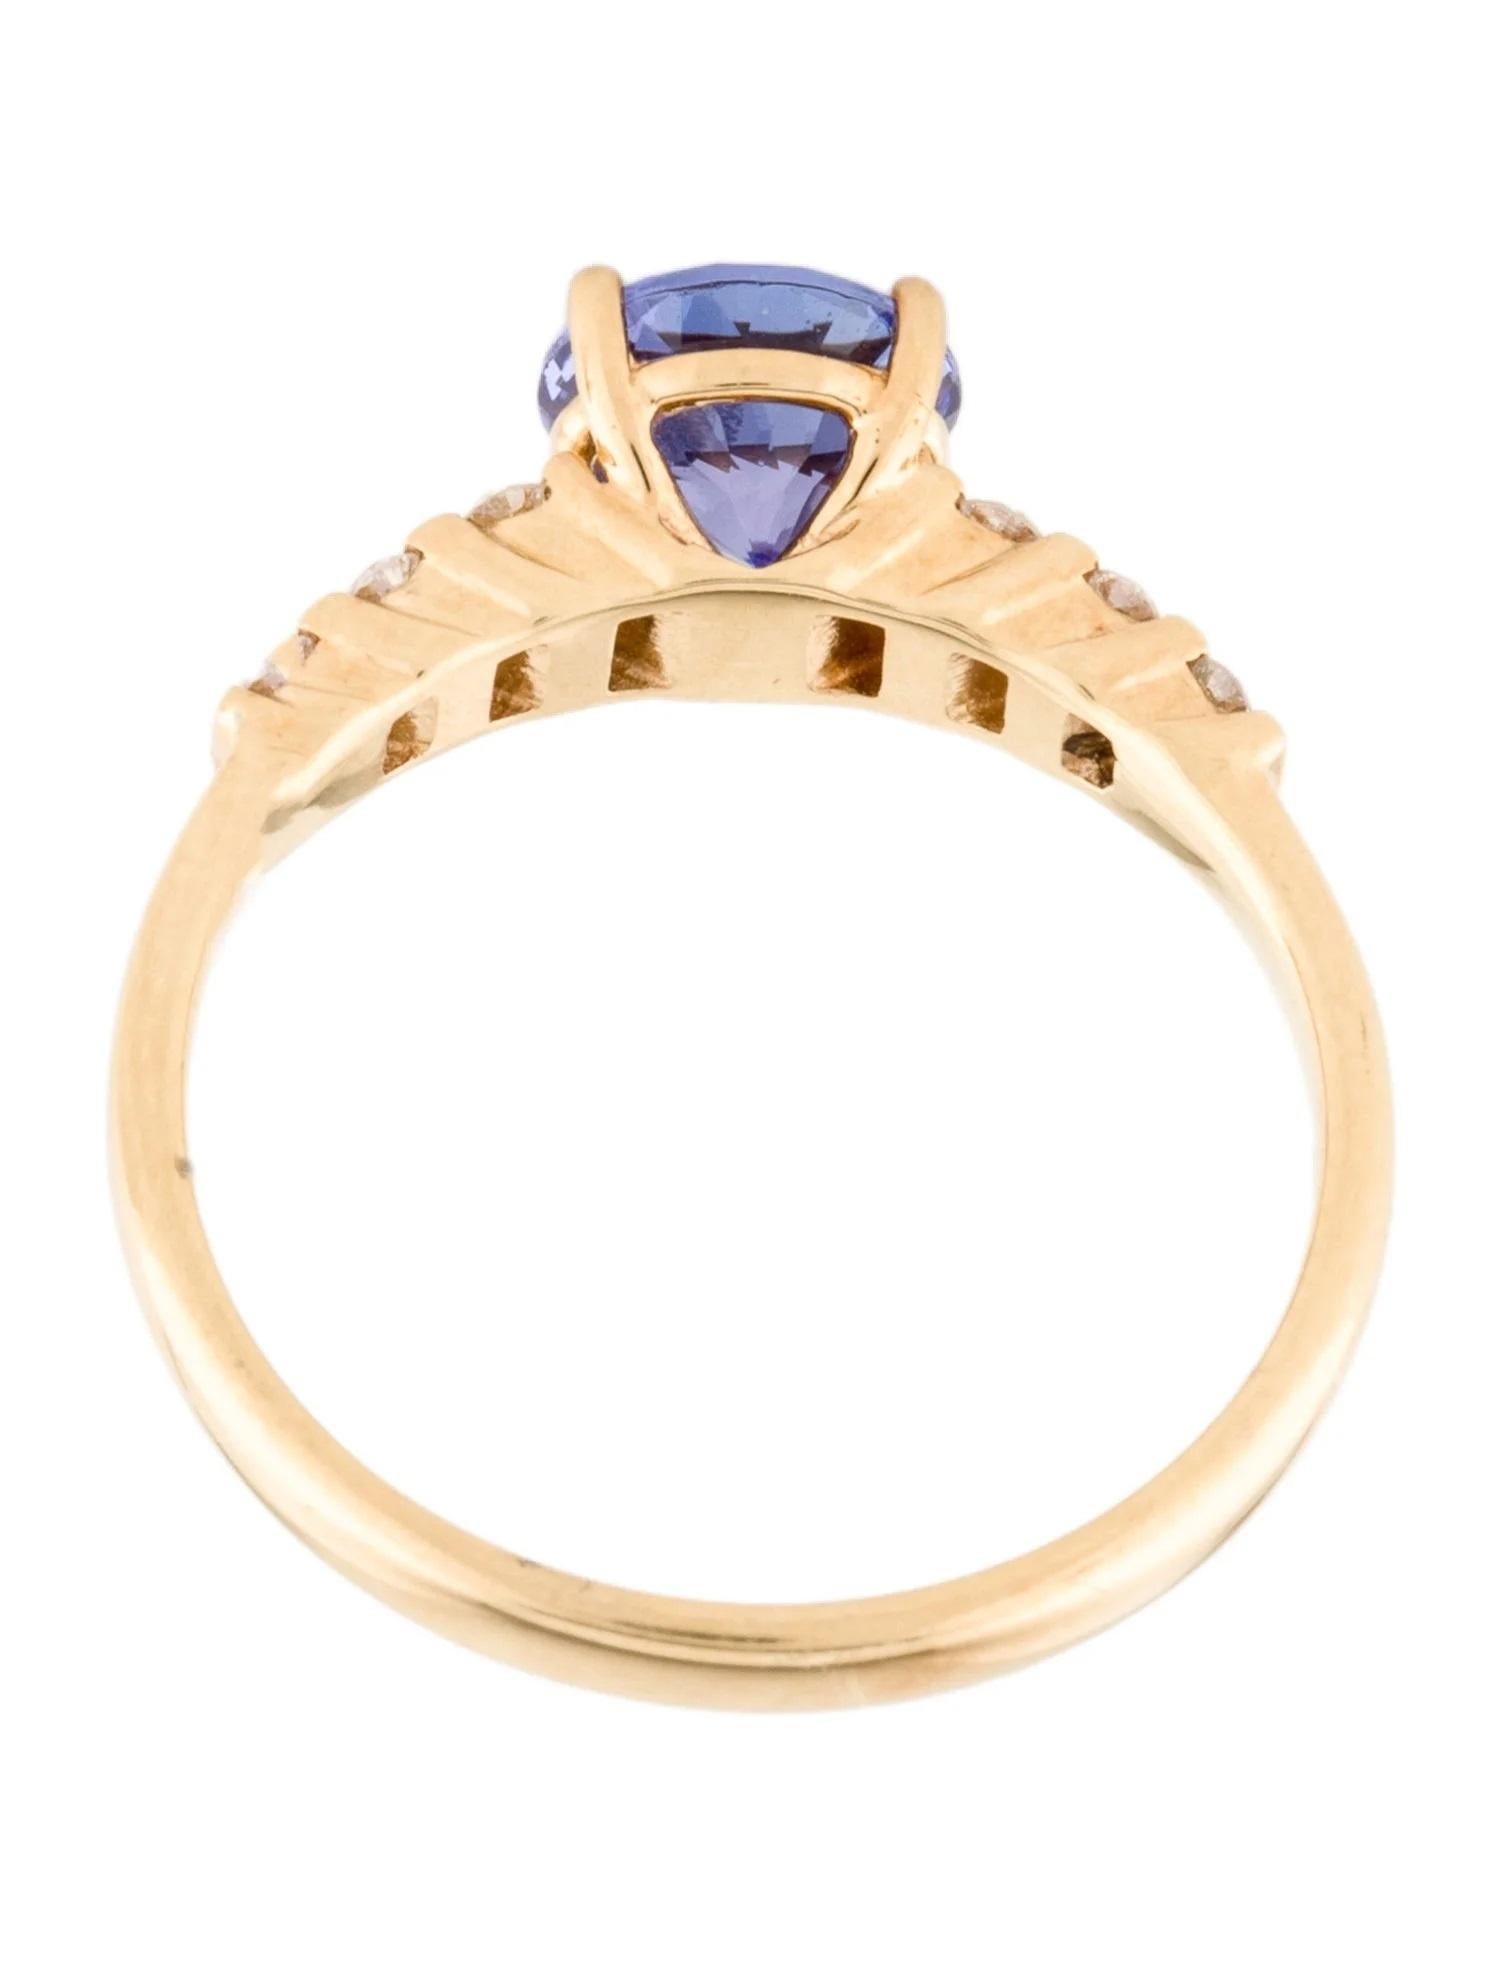 18K Tanzanite & Diamond Cocktail Ring  Round Faceted Tanzanite  Yellow Gold In New Condition For Sale In Holtsville, NY